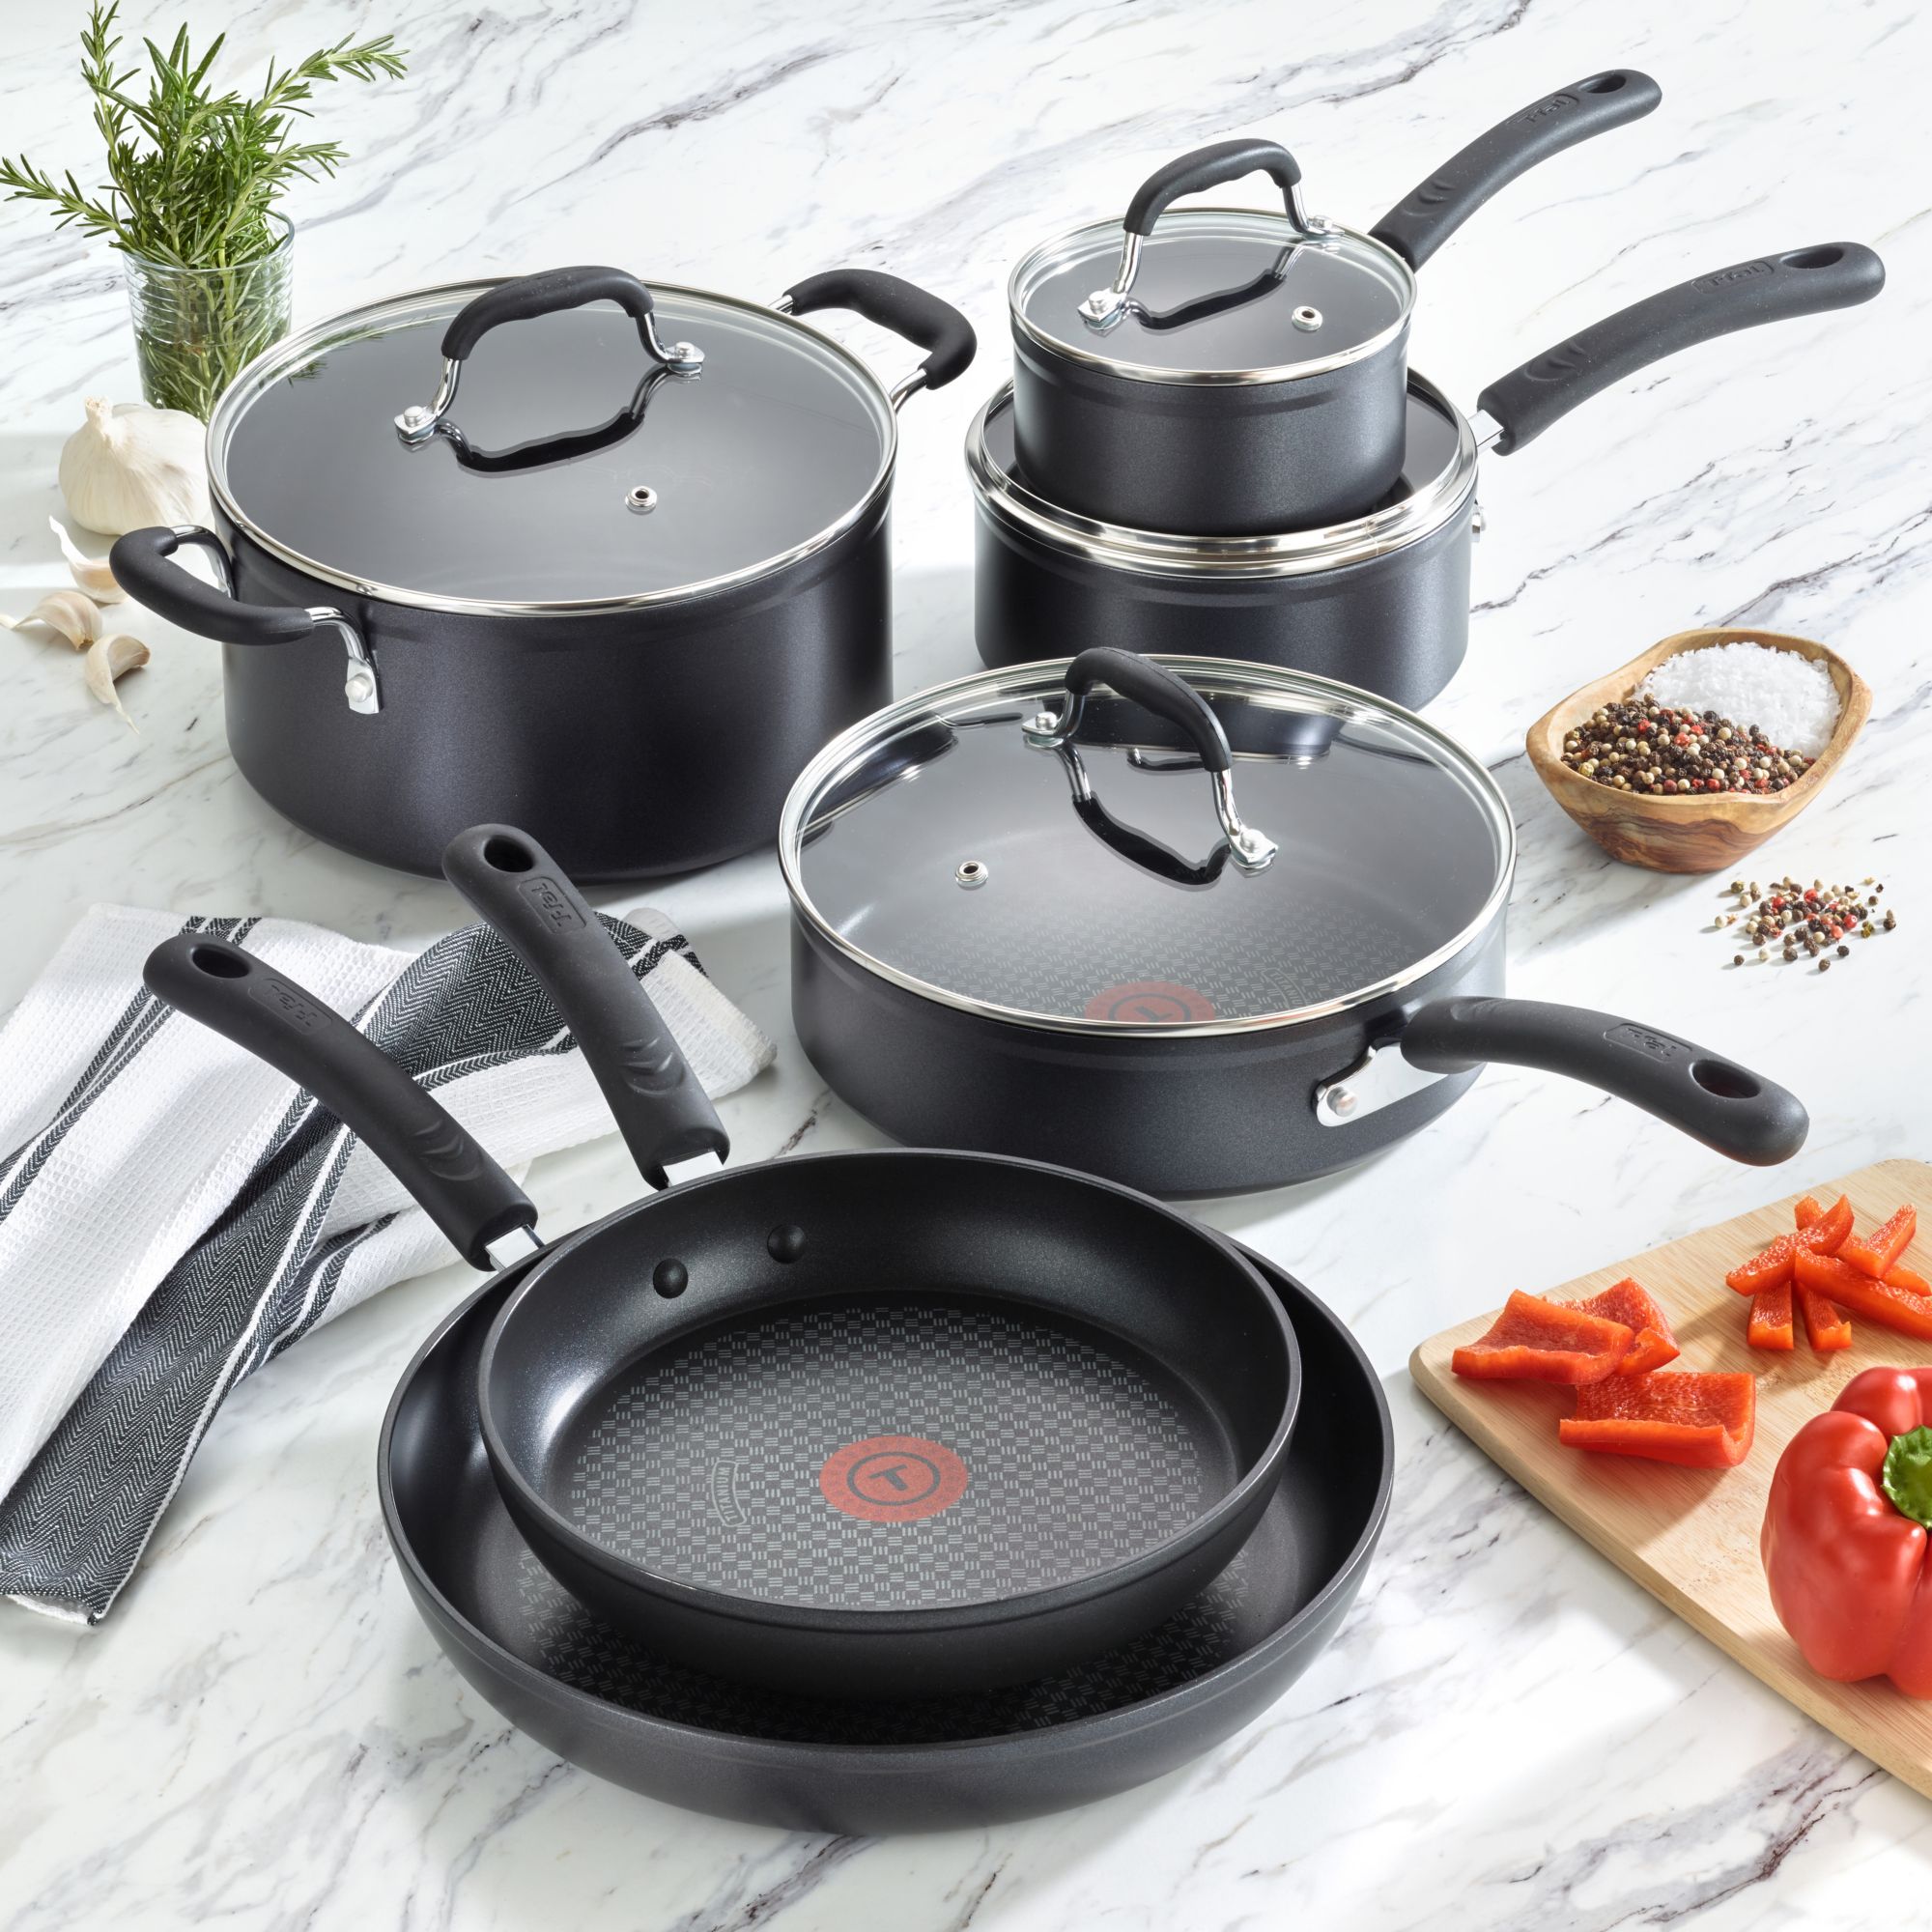 T-fal 10-Piece Forged Non-Stick Cookware Set